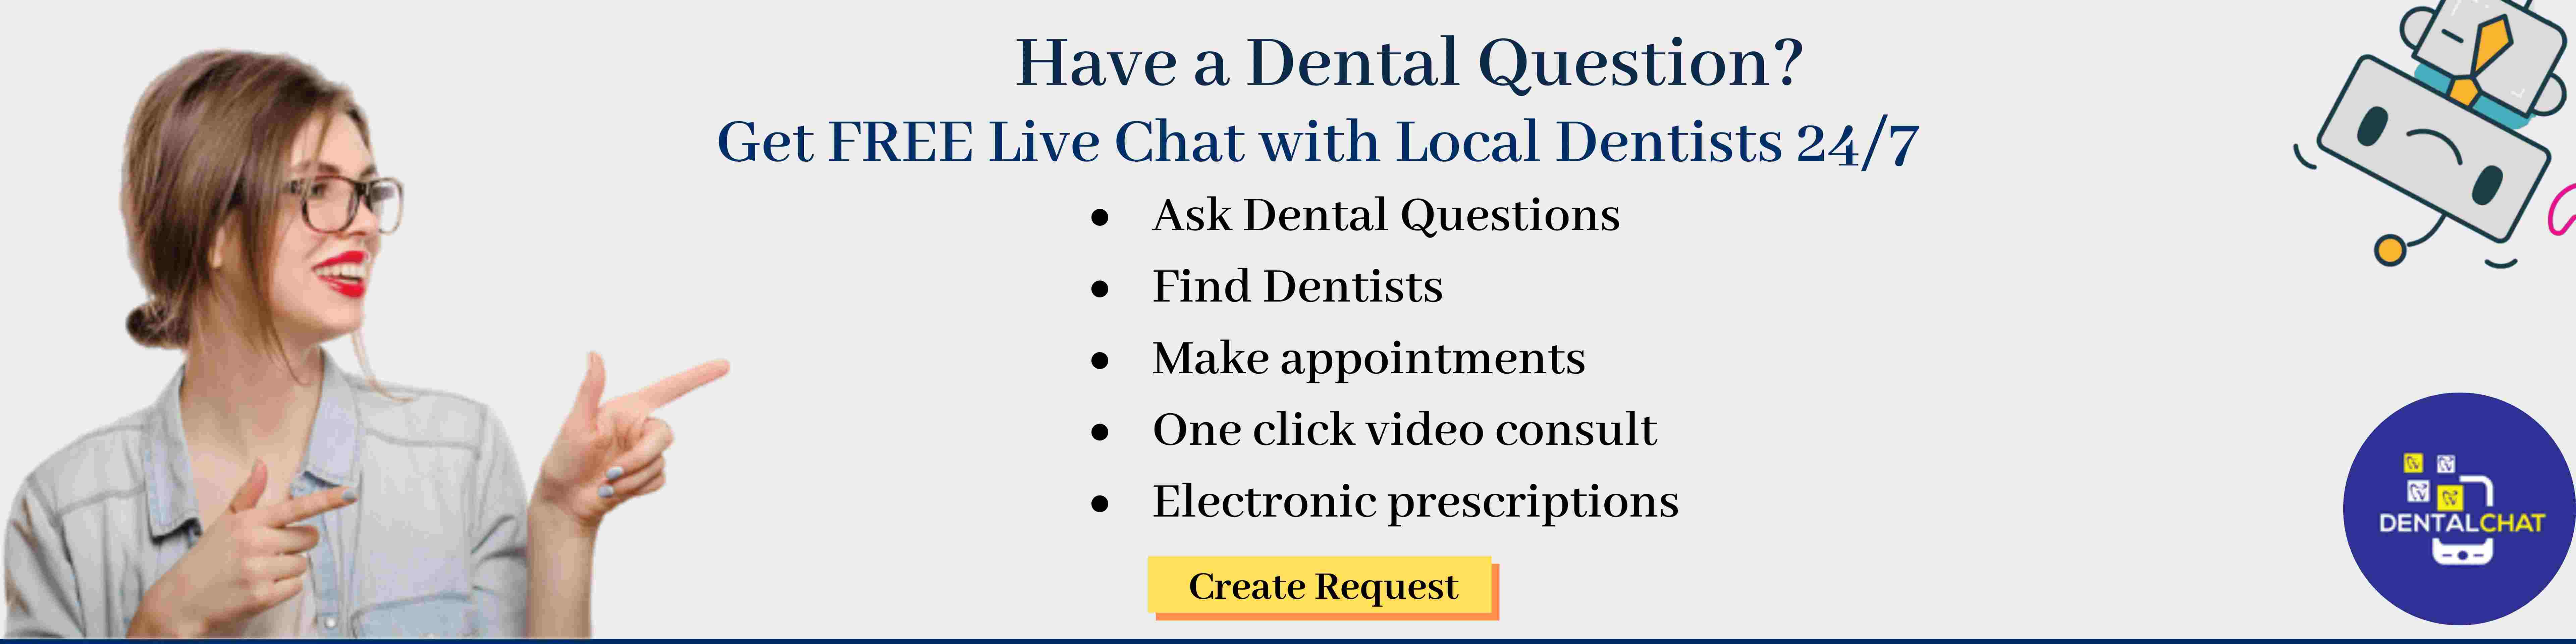 Teledental Services Live Chat with Local Dentists Get Real Time Dentists Answers